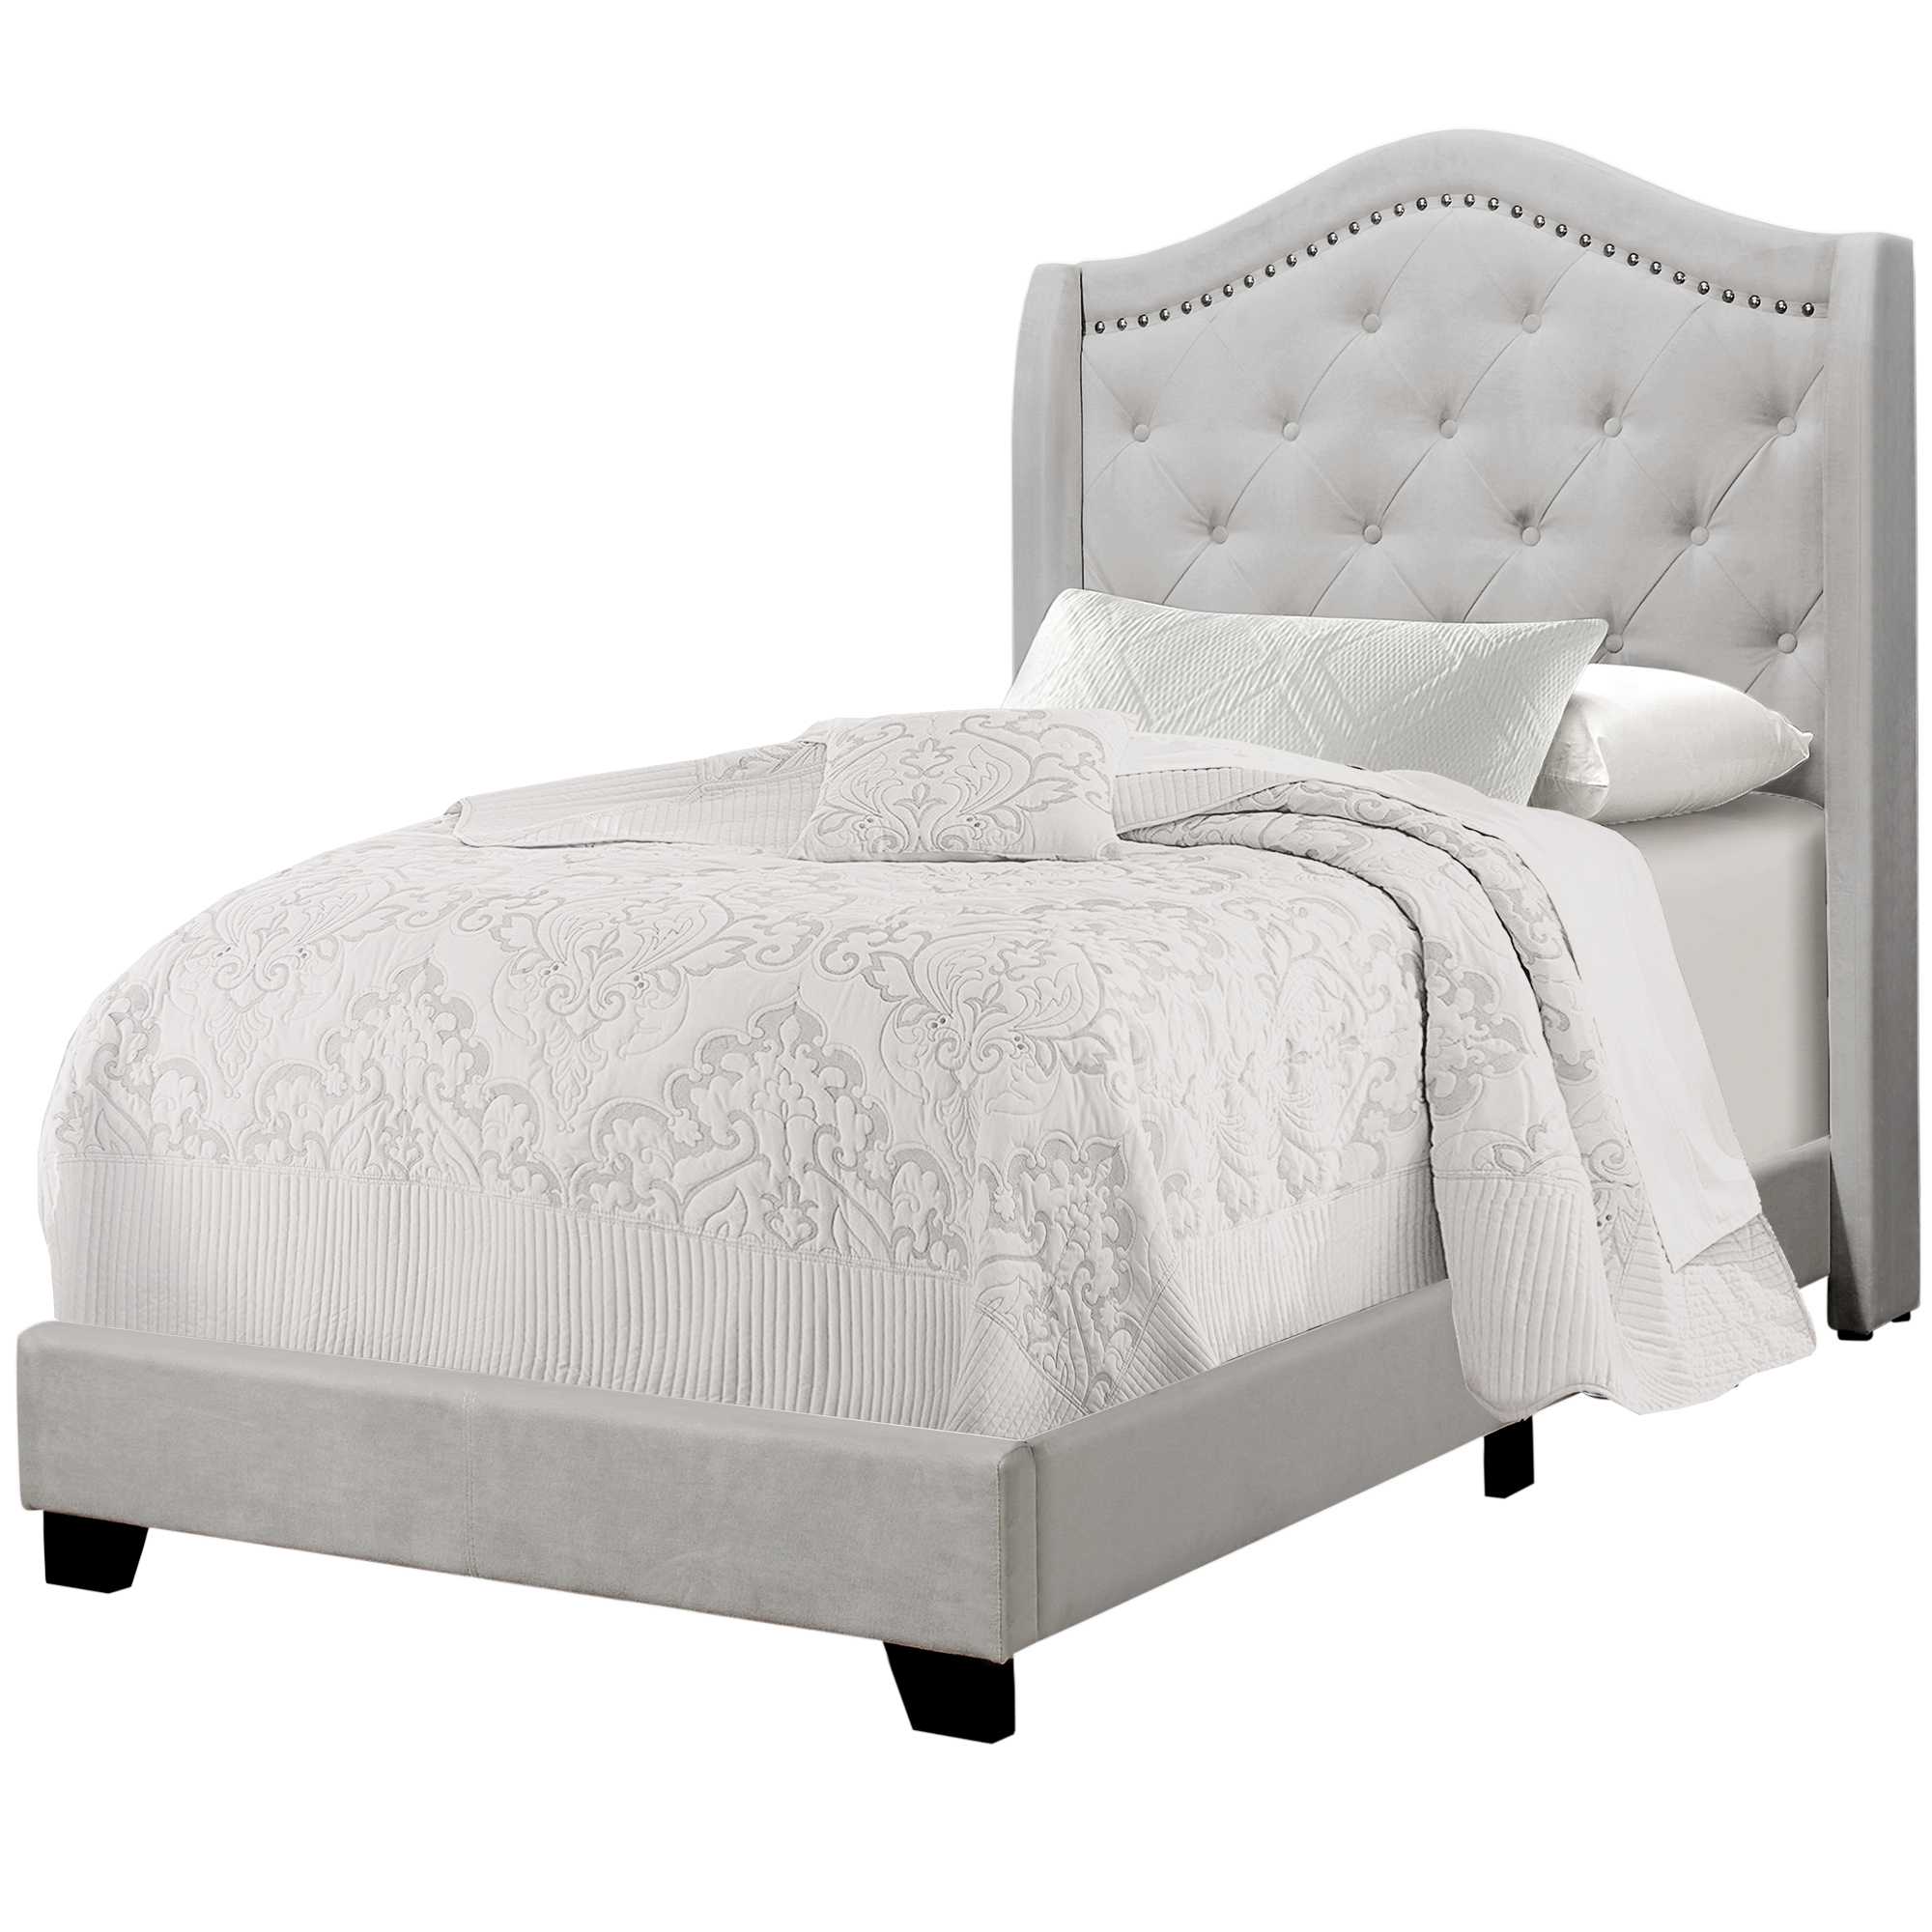 45.75" x 82.75" x 56.5" Light Grey Foam Solid Wood Velvet Twin Size Bed With A Chrome Trim